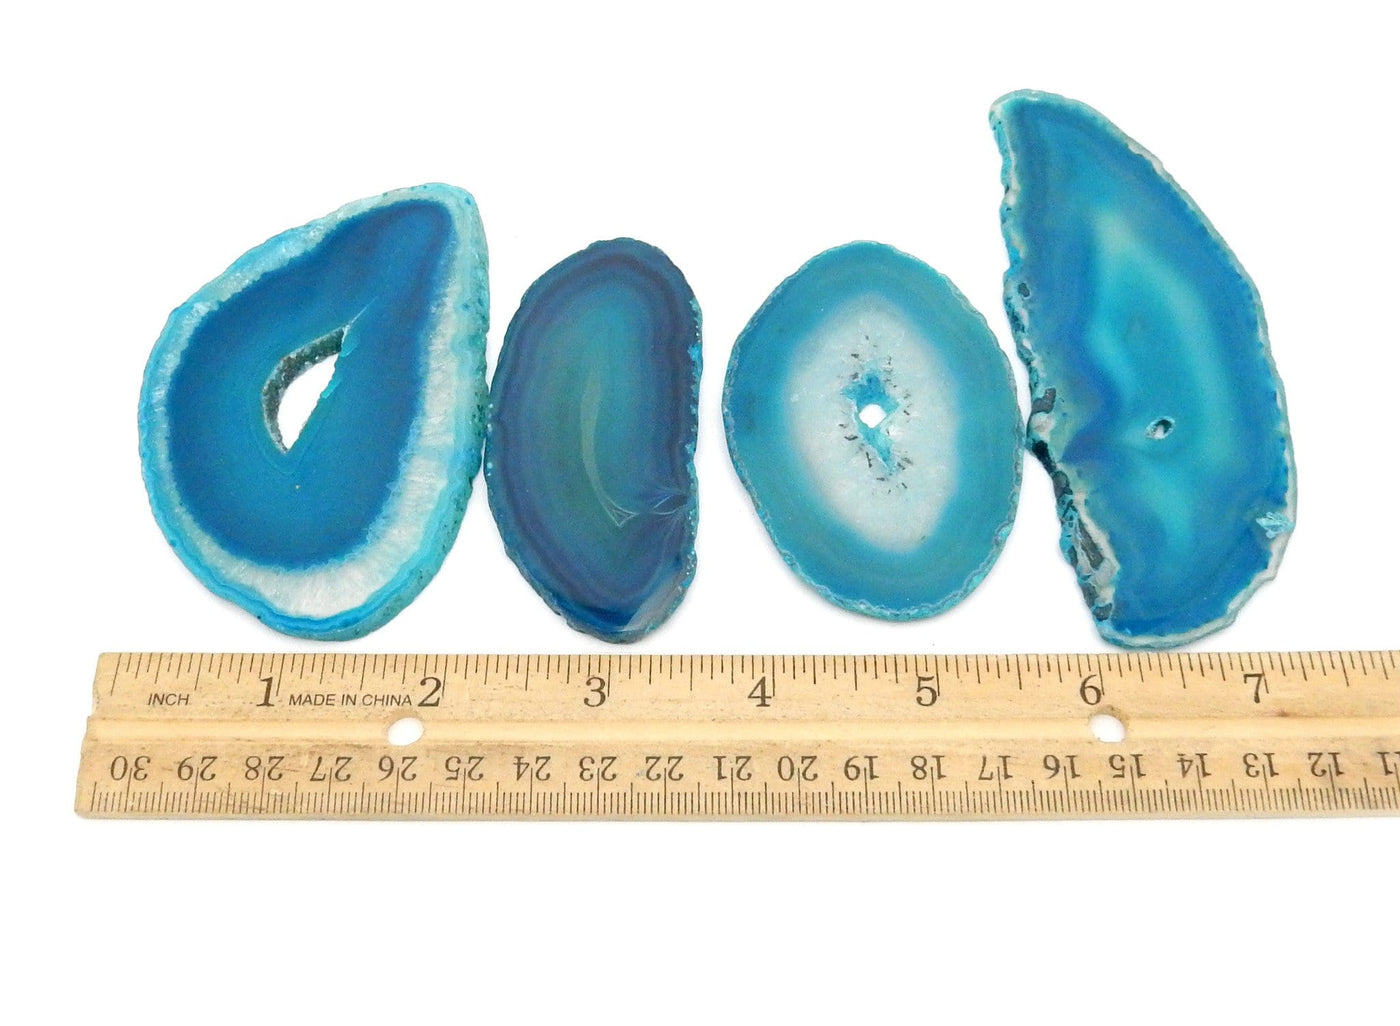 4 Teal Agate Slices in a Size number 1 next to a ruler for sizing